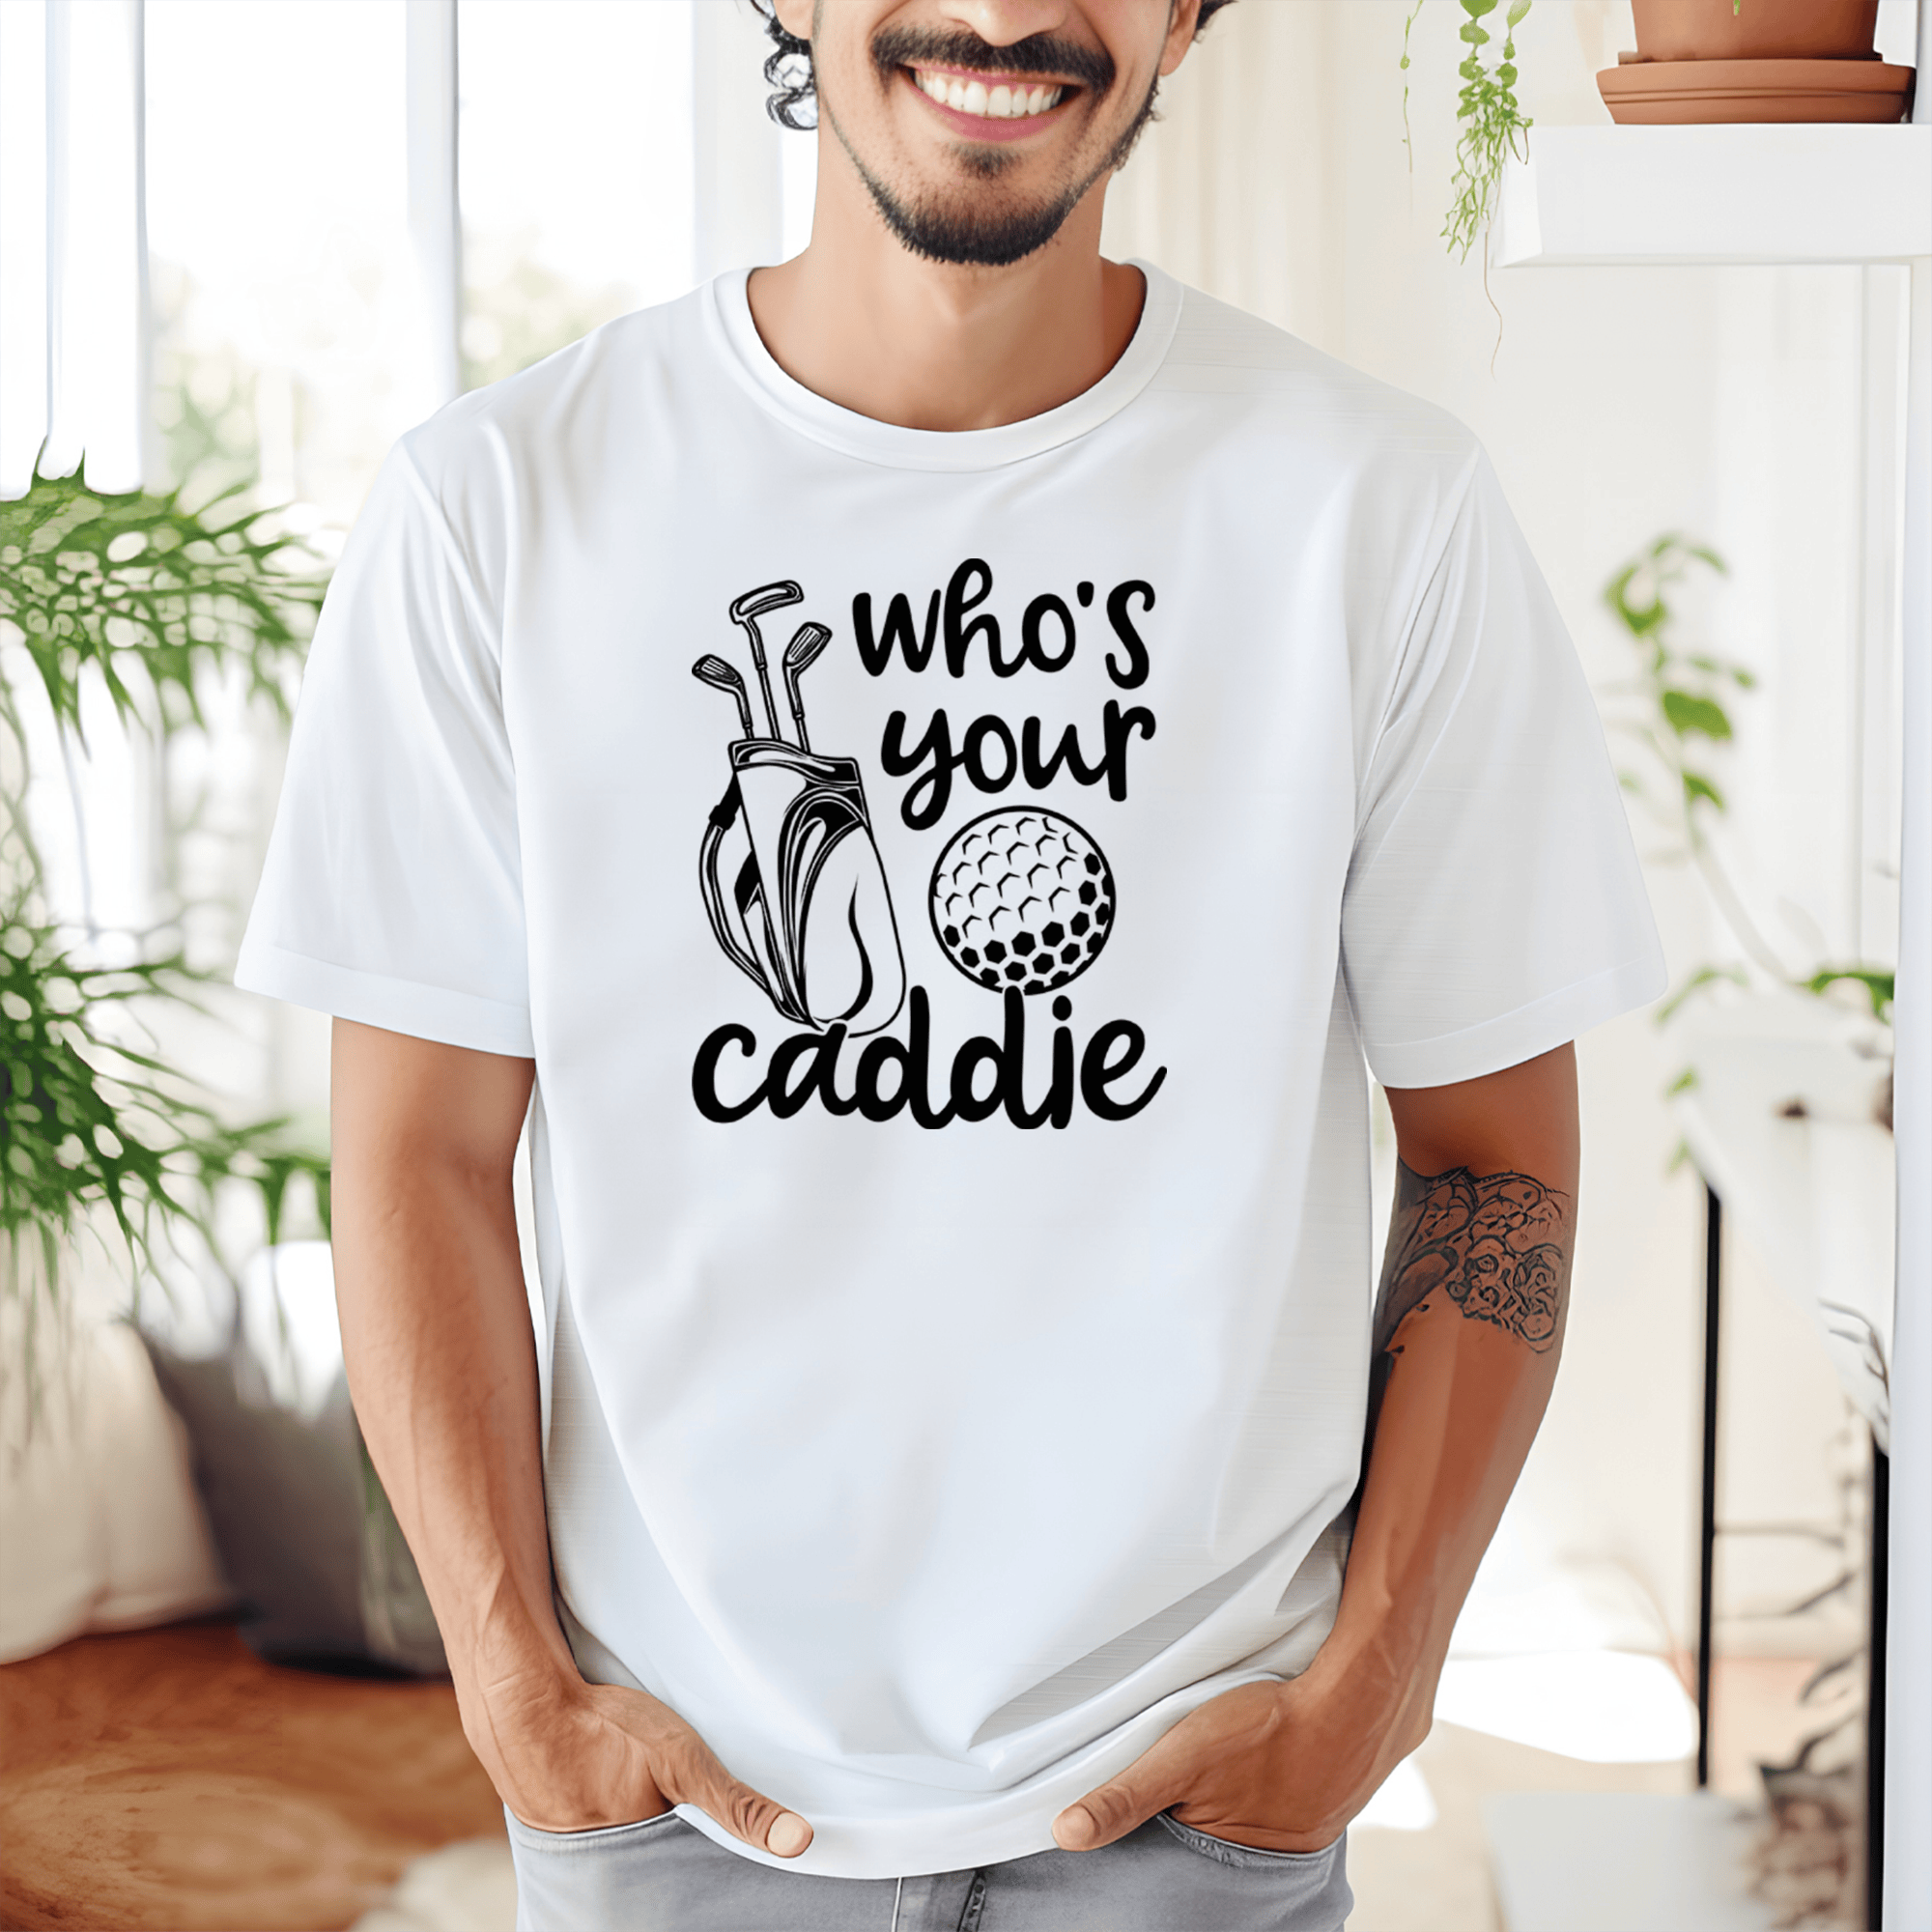 White Mens T-Shirt With Whos Your Caddie Design